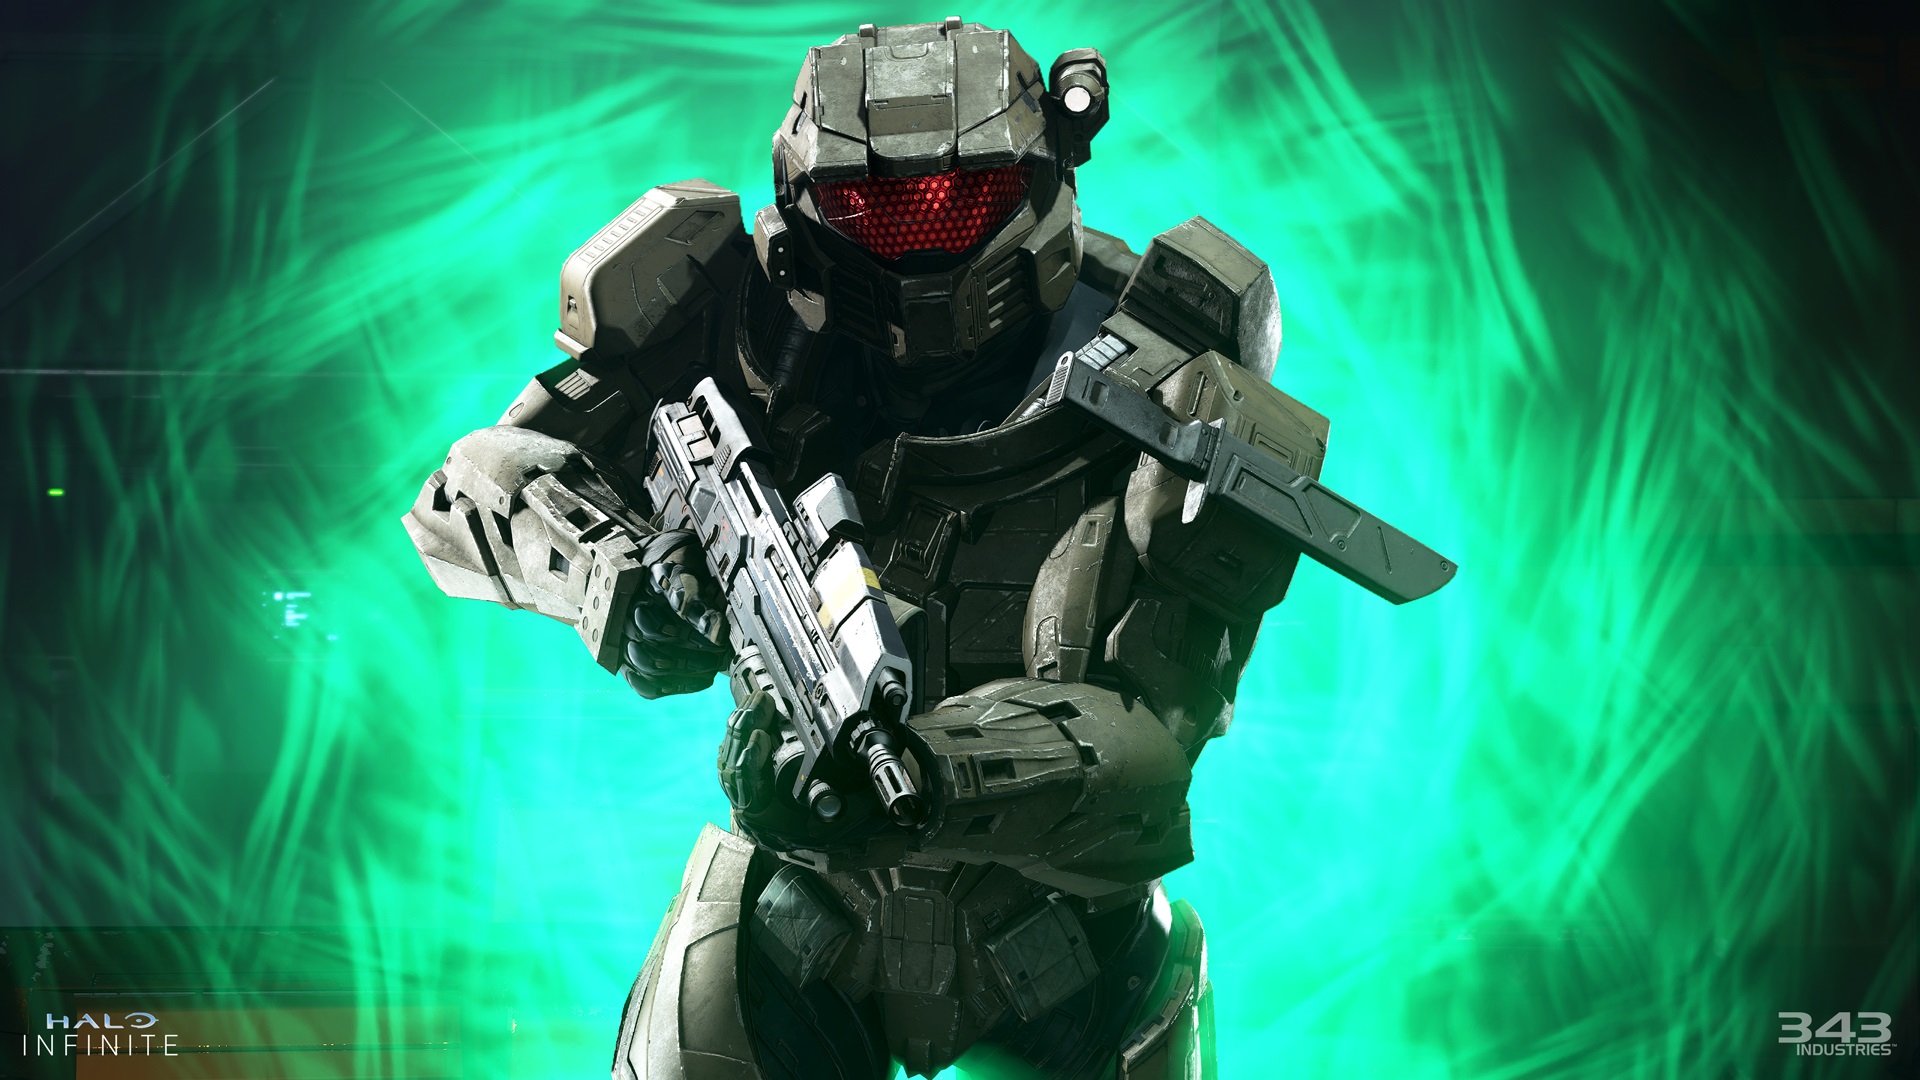 Halo Infinite screenshot of a Spartan man in Mark IV armor holding an assault rifle with an Evolved MA5 weapon model